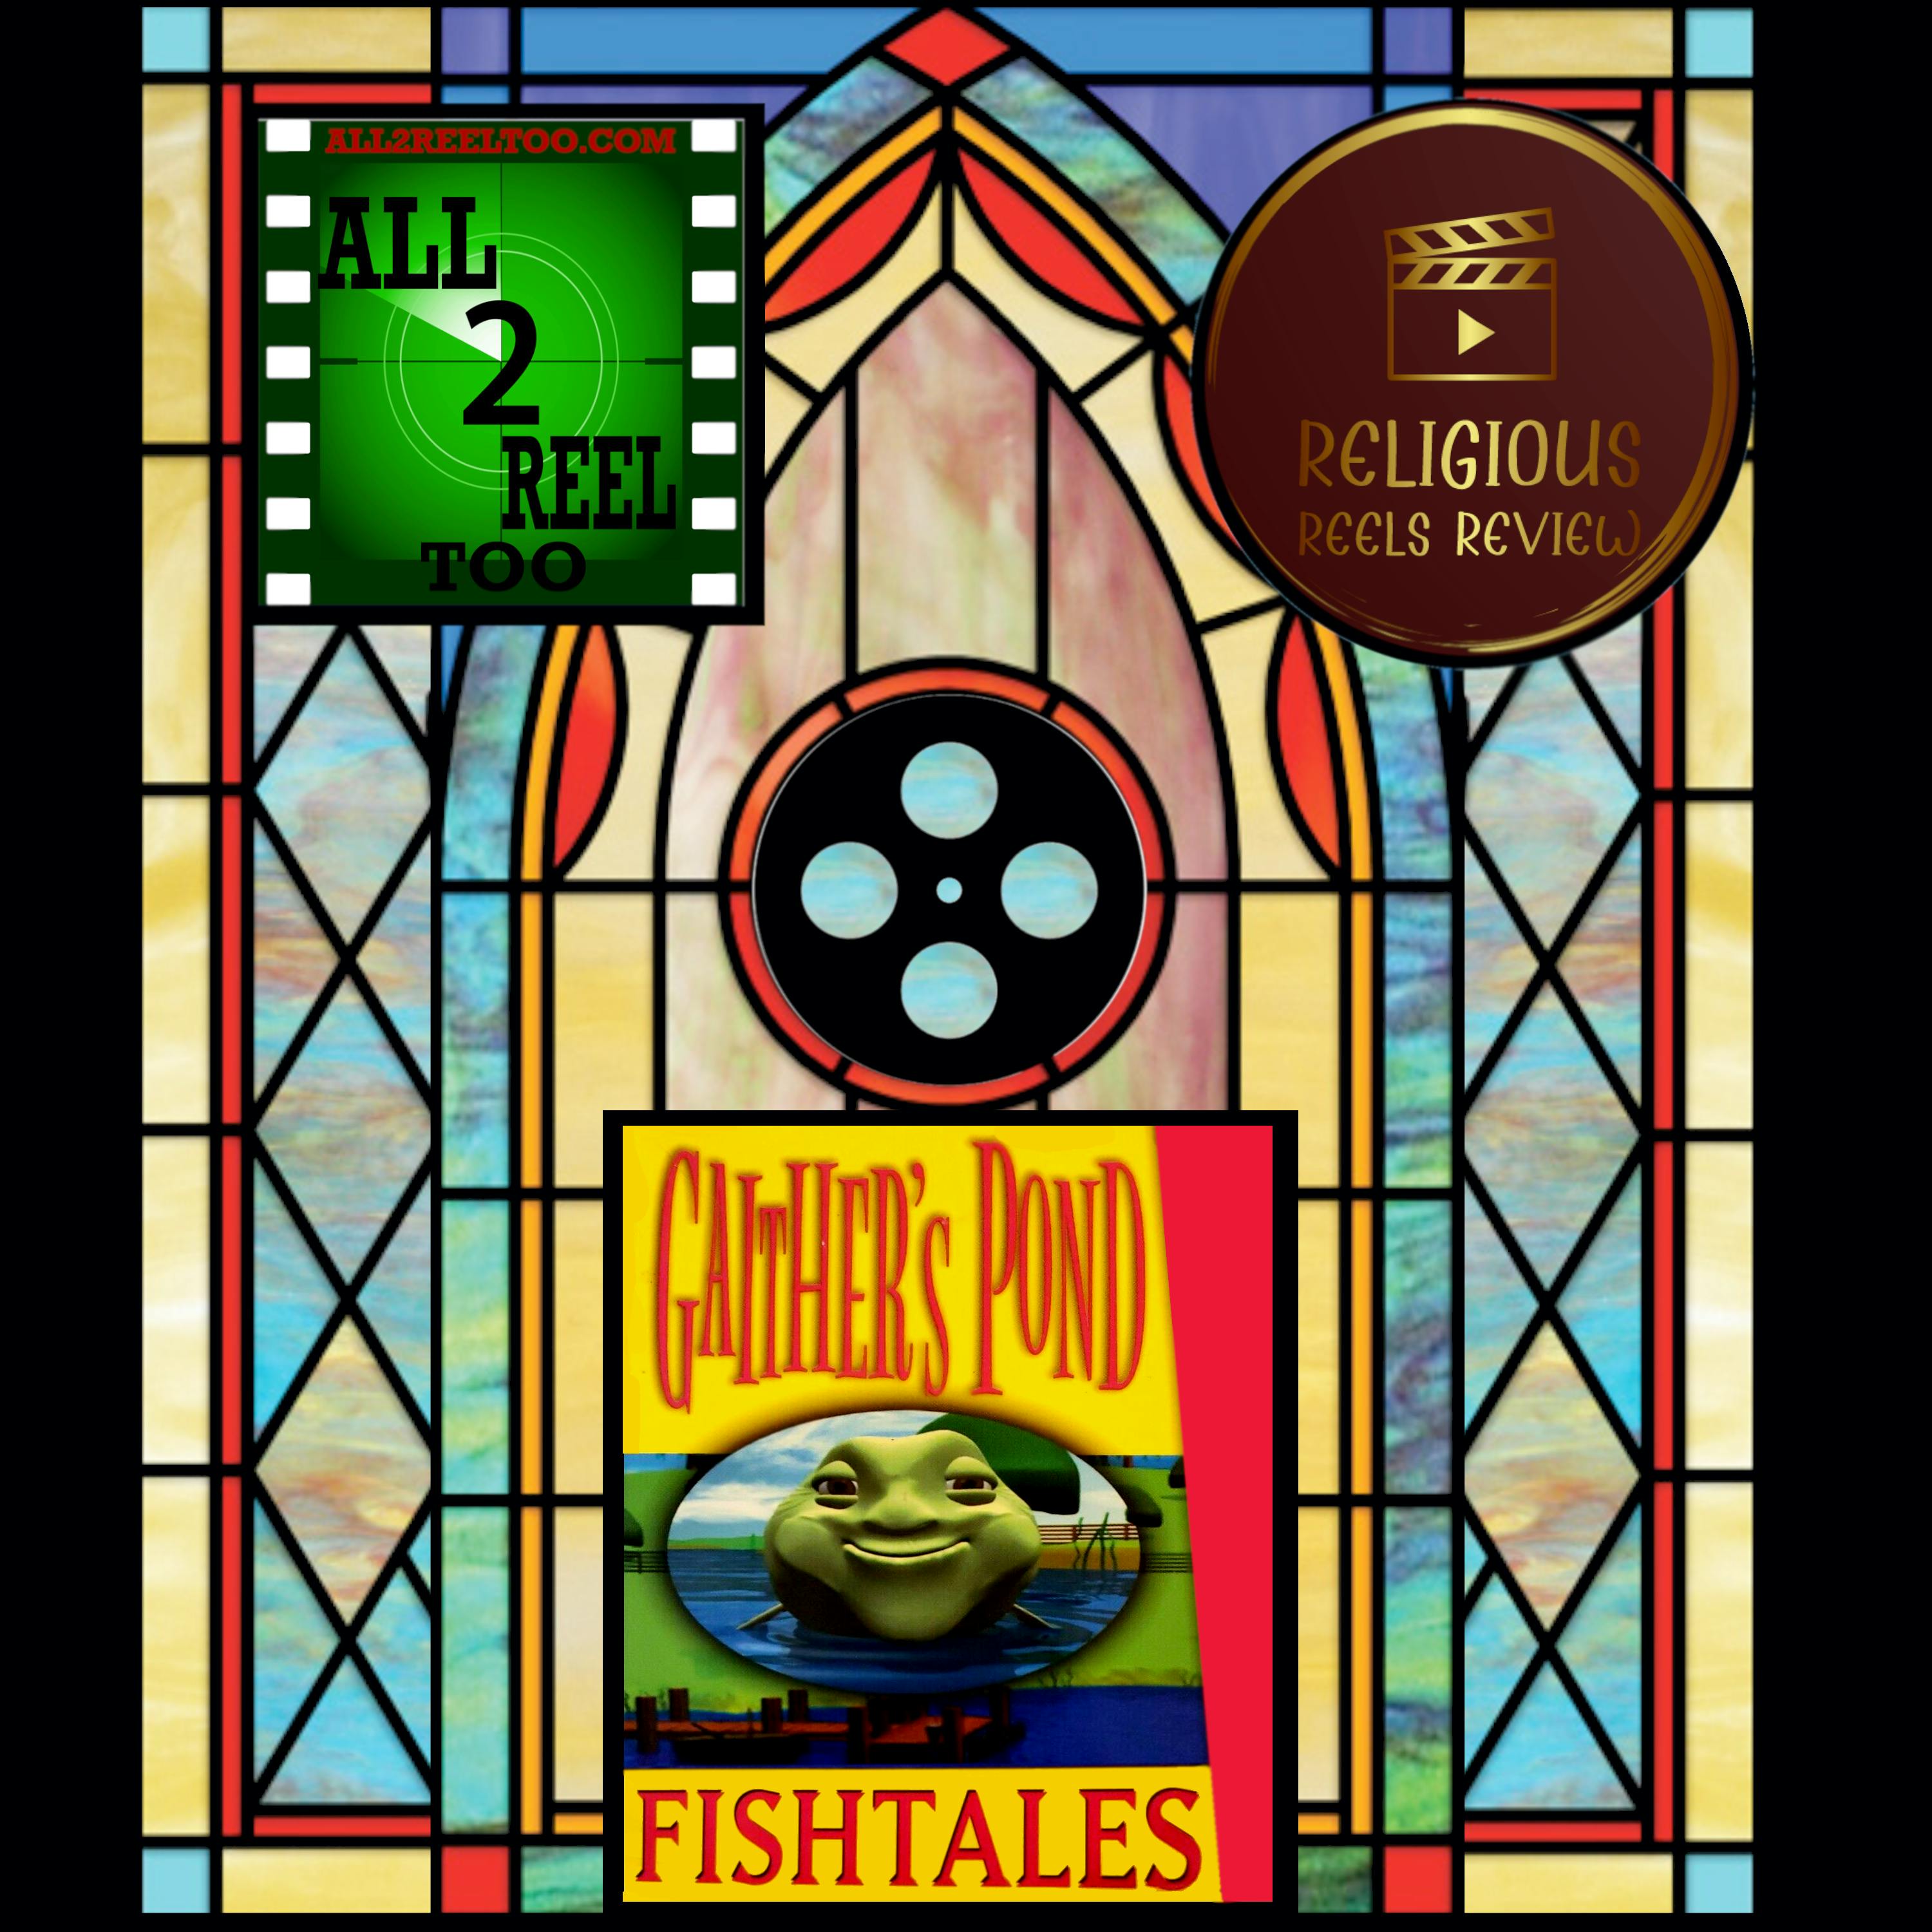 Gaither's Pond-Fish Tales (1999) - RELIGIOUS REELS REVIEW